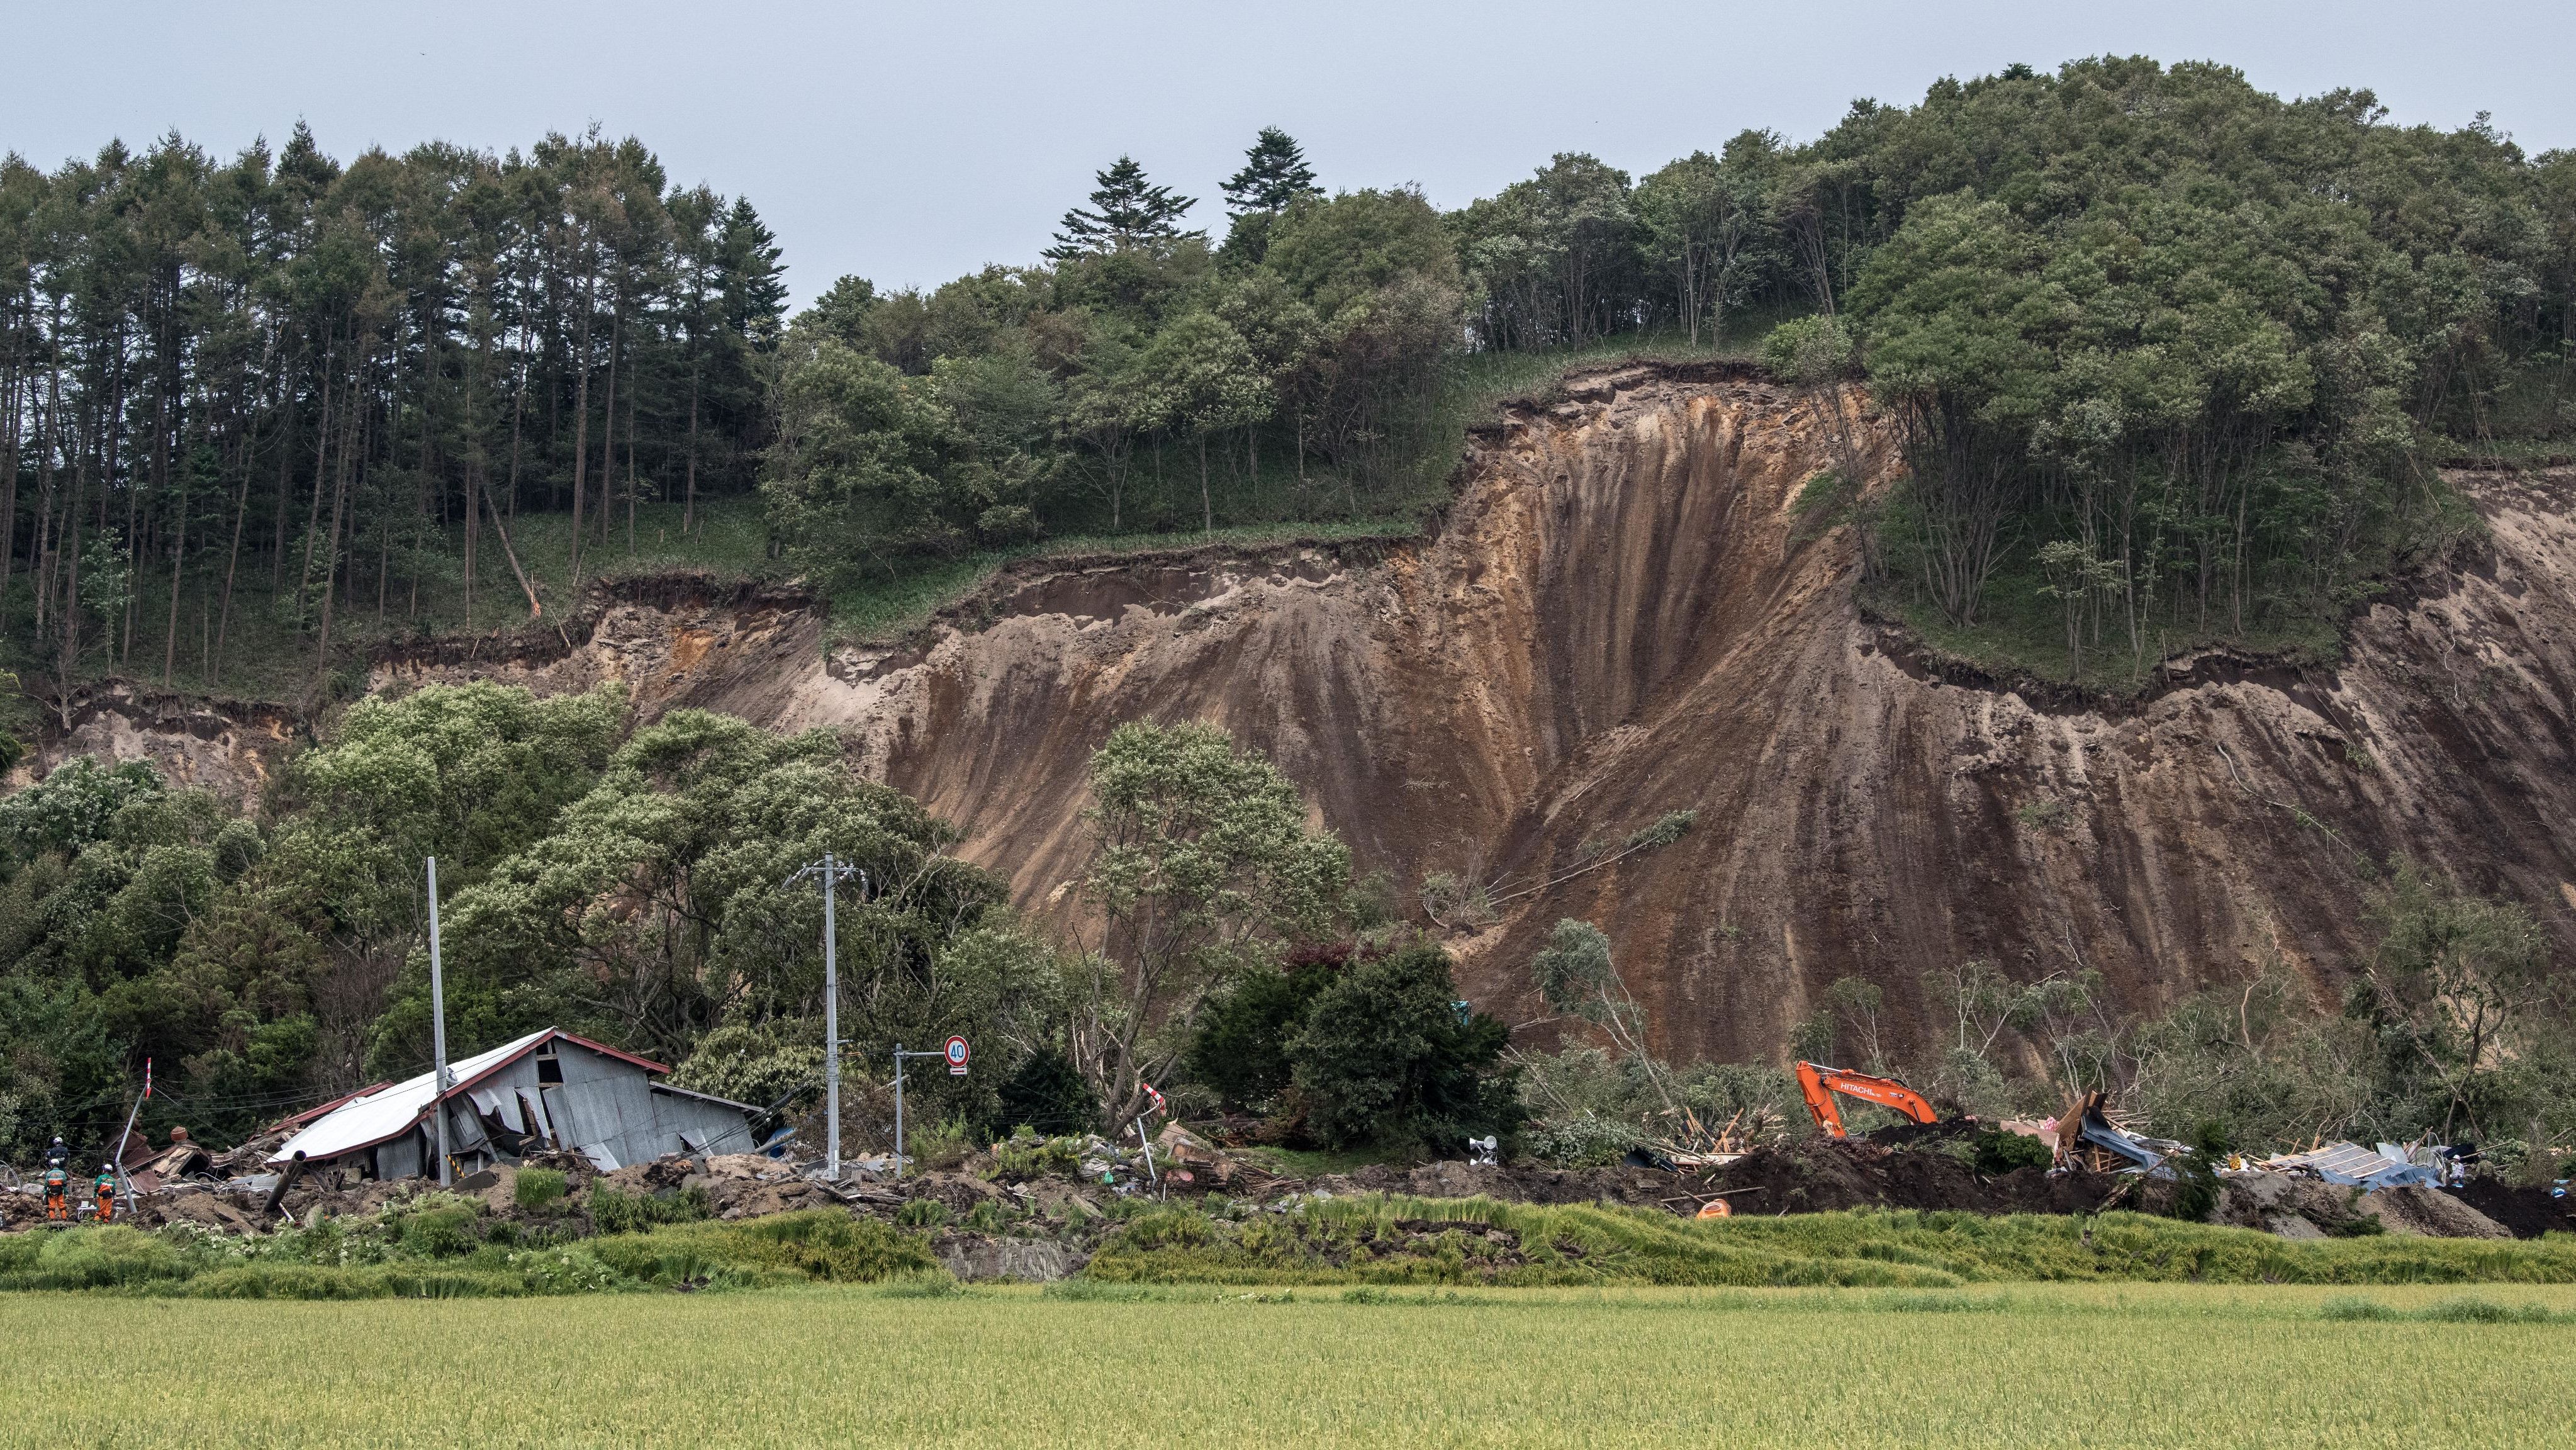 Buildings lie in ruins after being hit by a landslide caused by an earthquake, on September 7, 2018 in Atsuma.